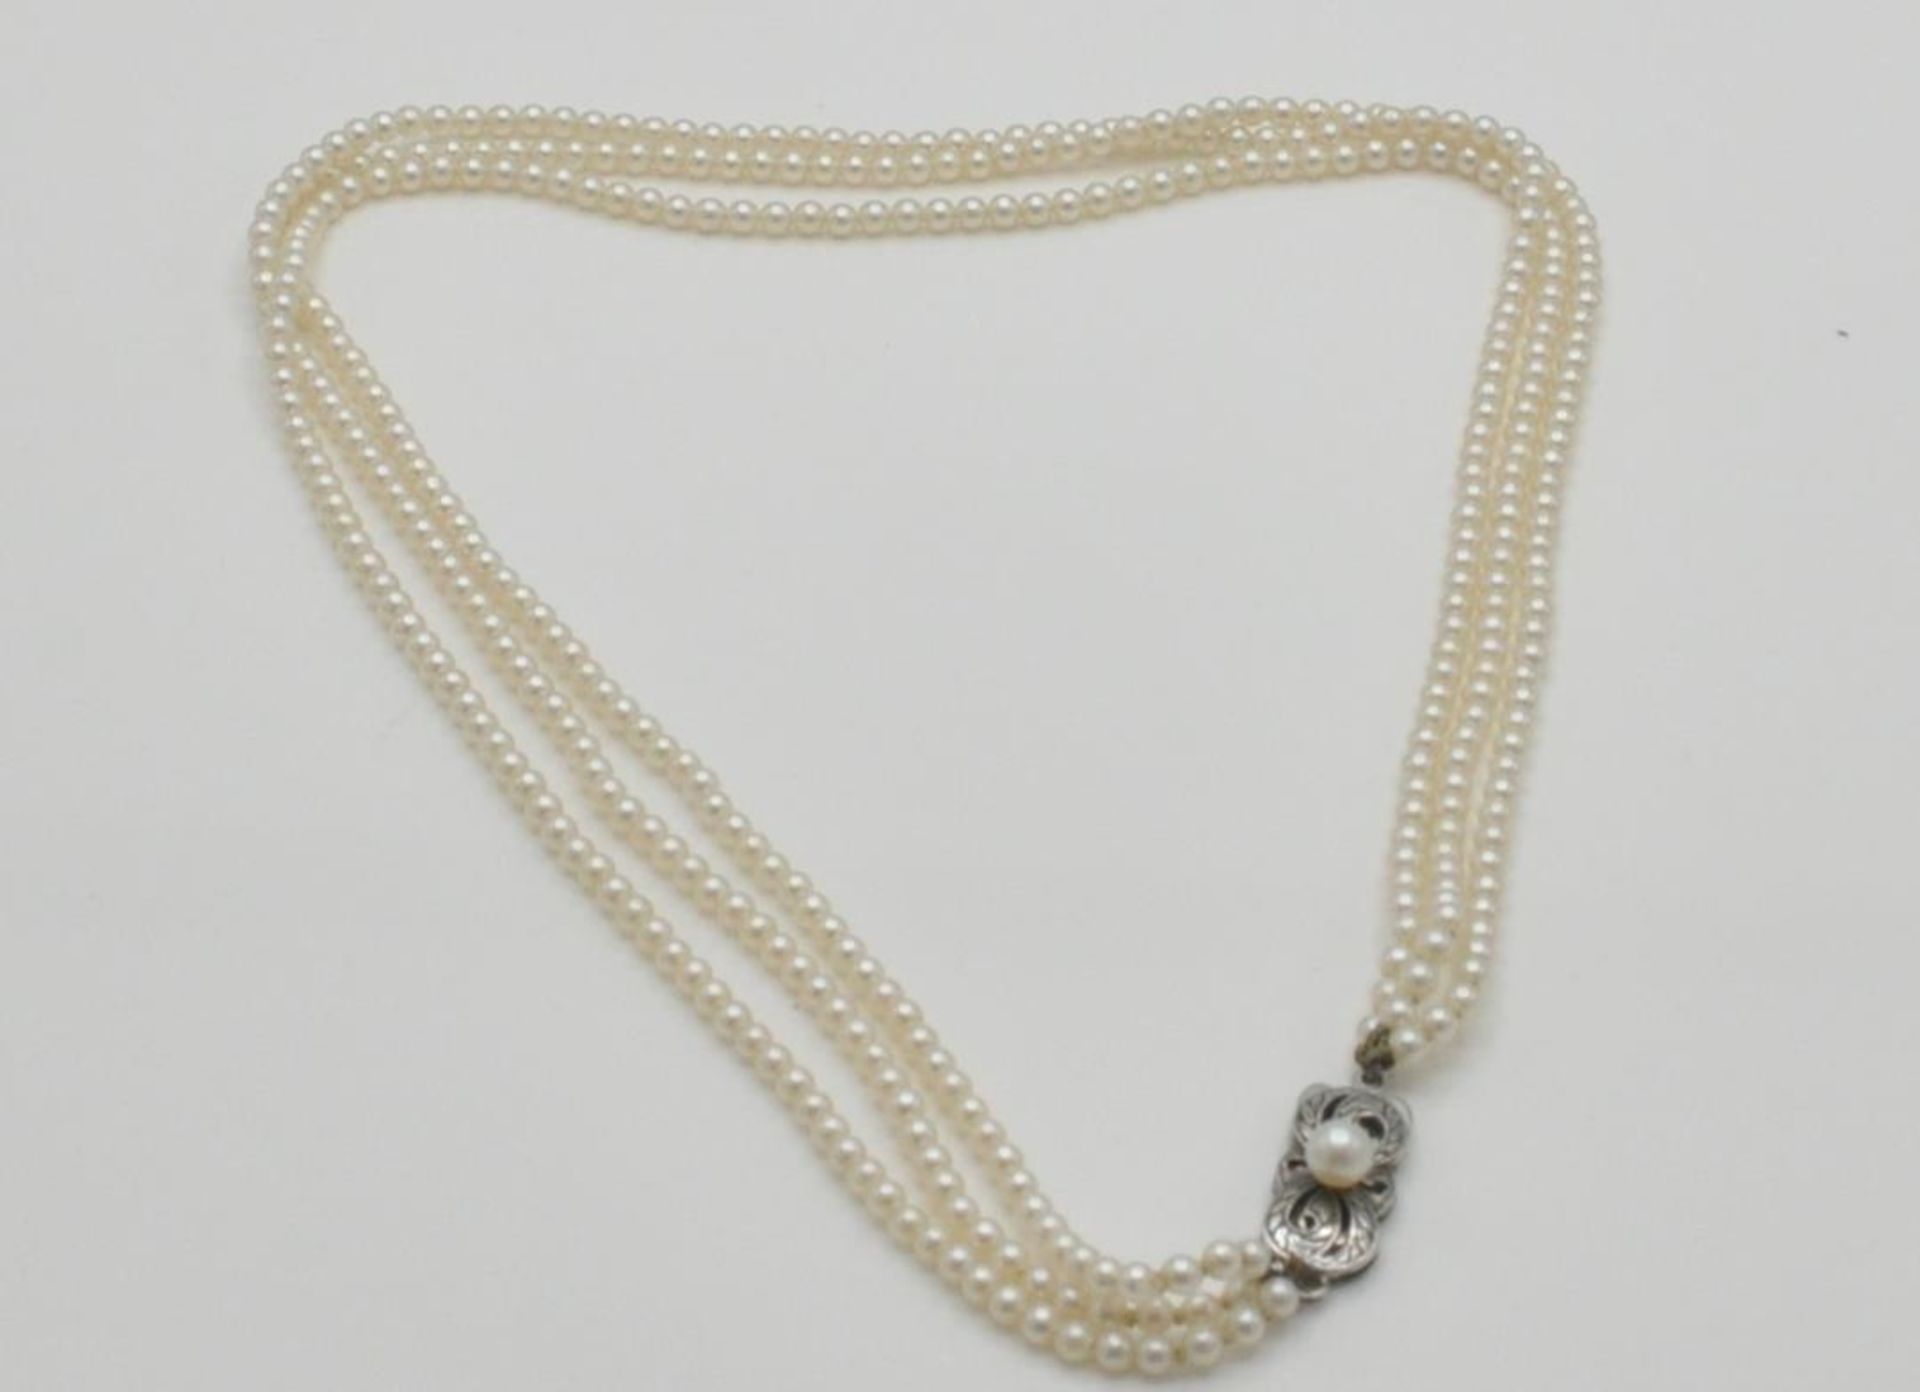 A Vintage Mikimoto Cultured Pearl Necklace